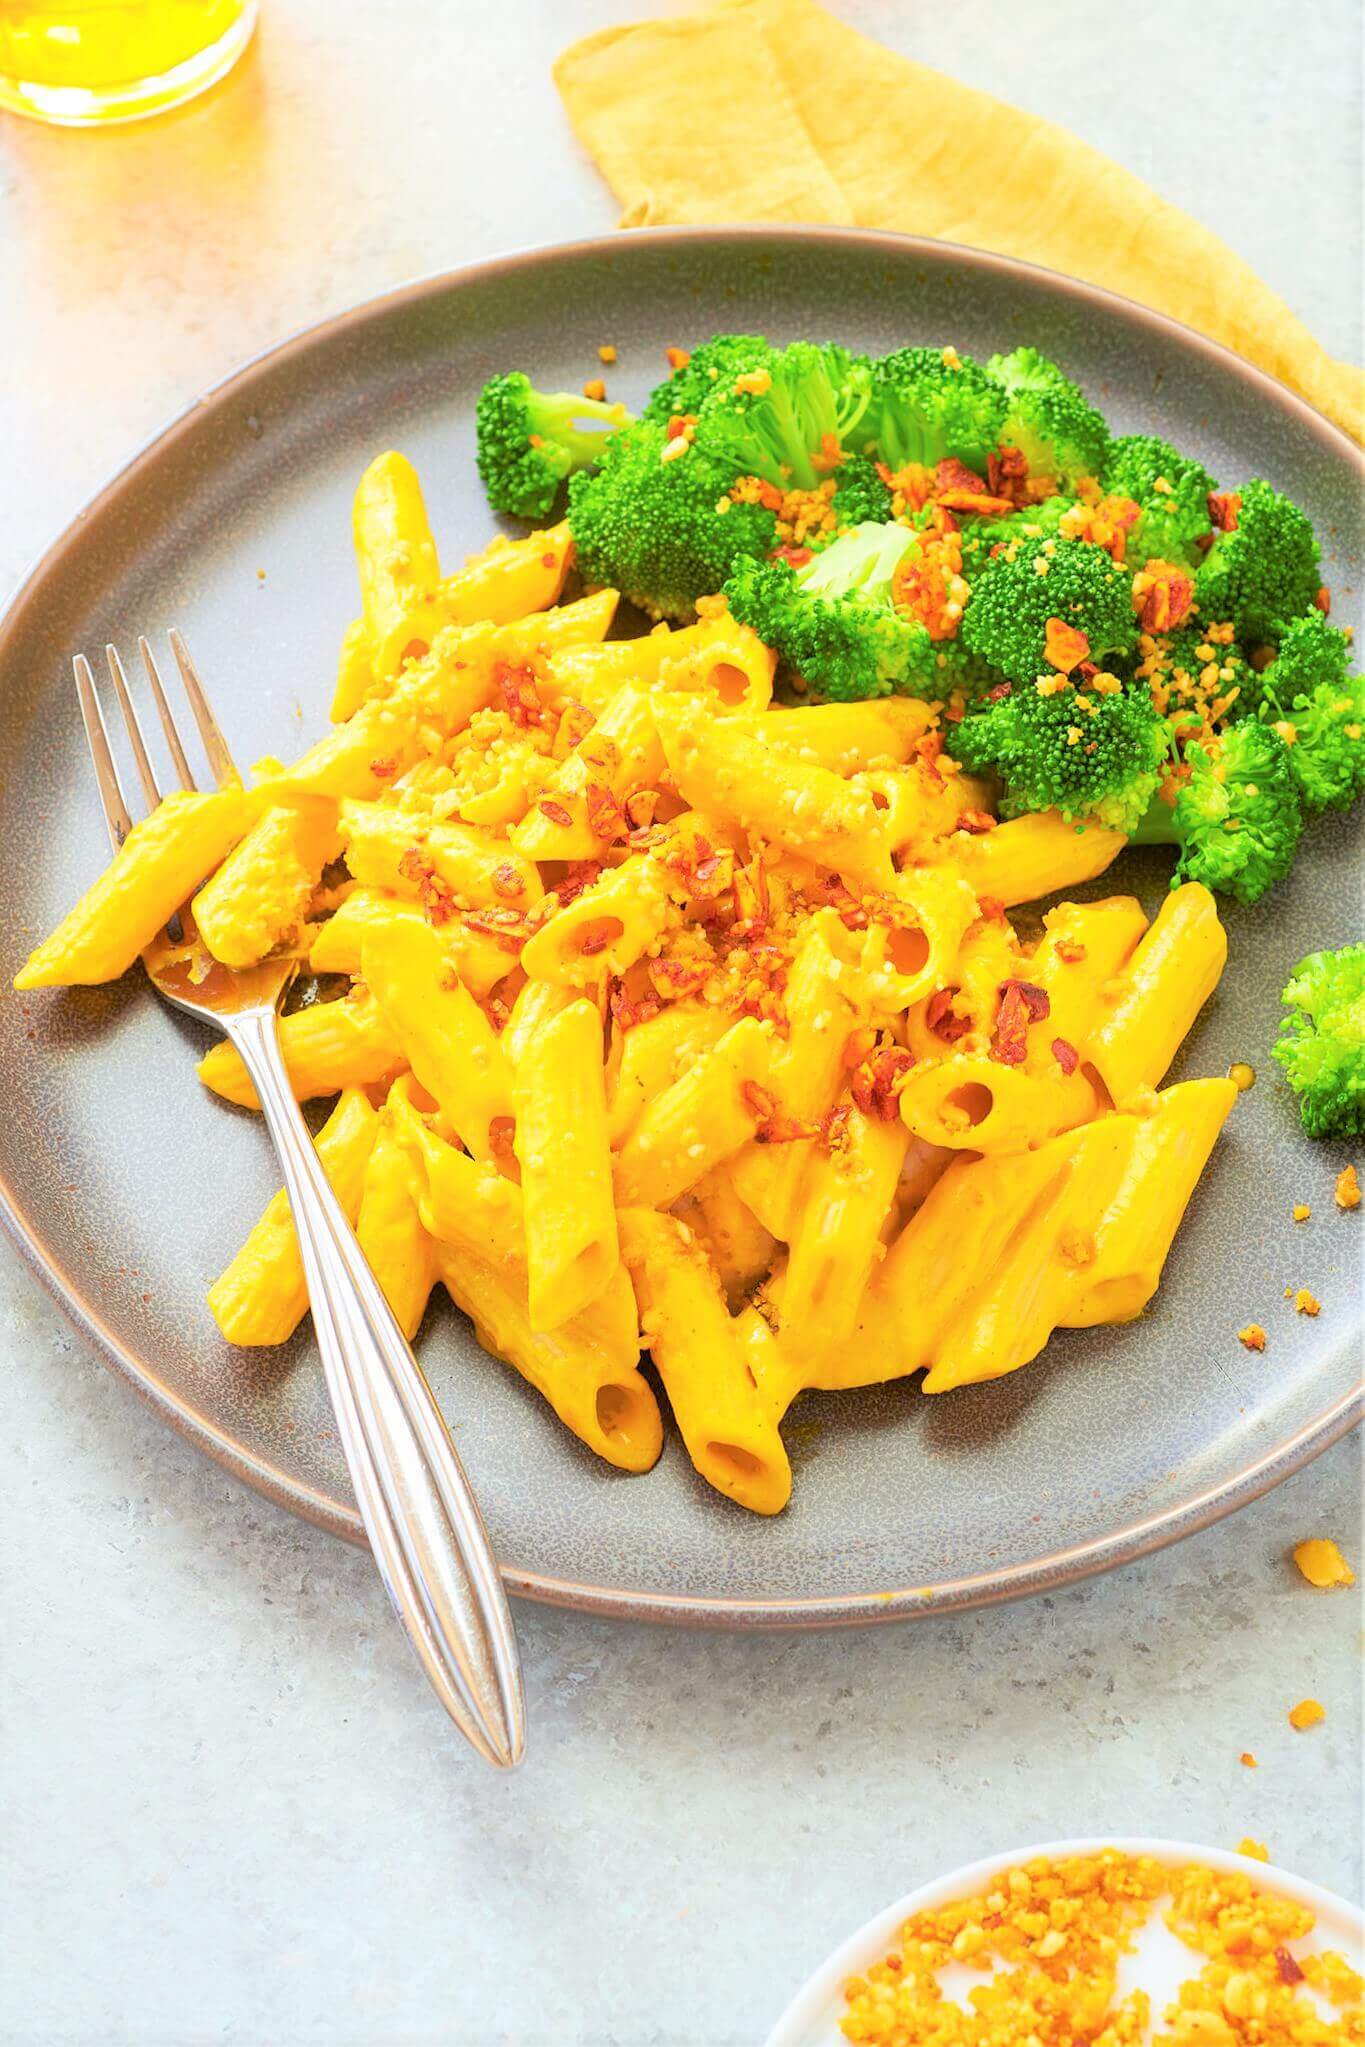 Mac and "Cheese" with Steamed Broccoli